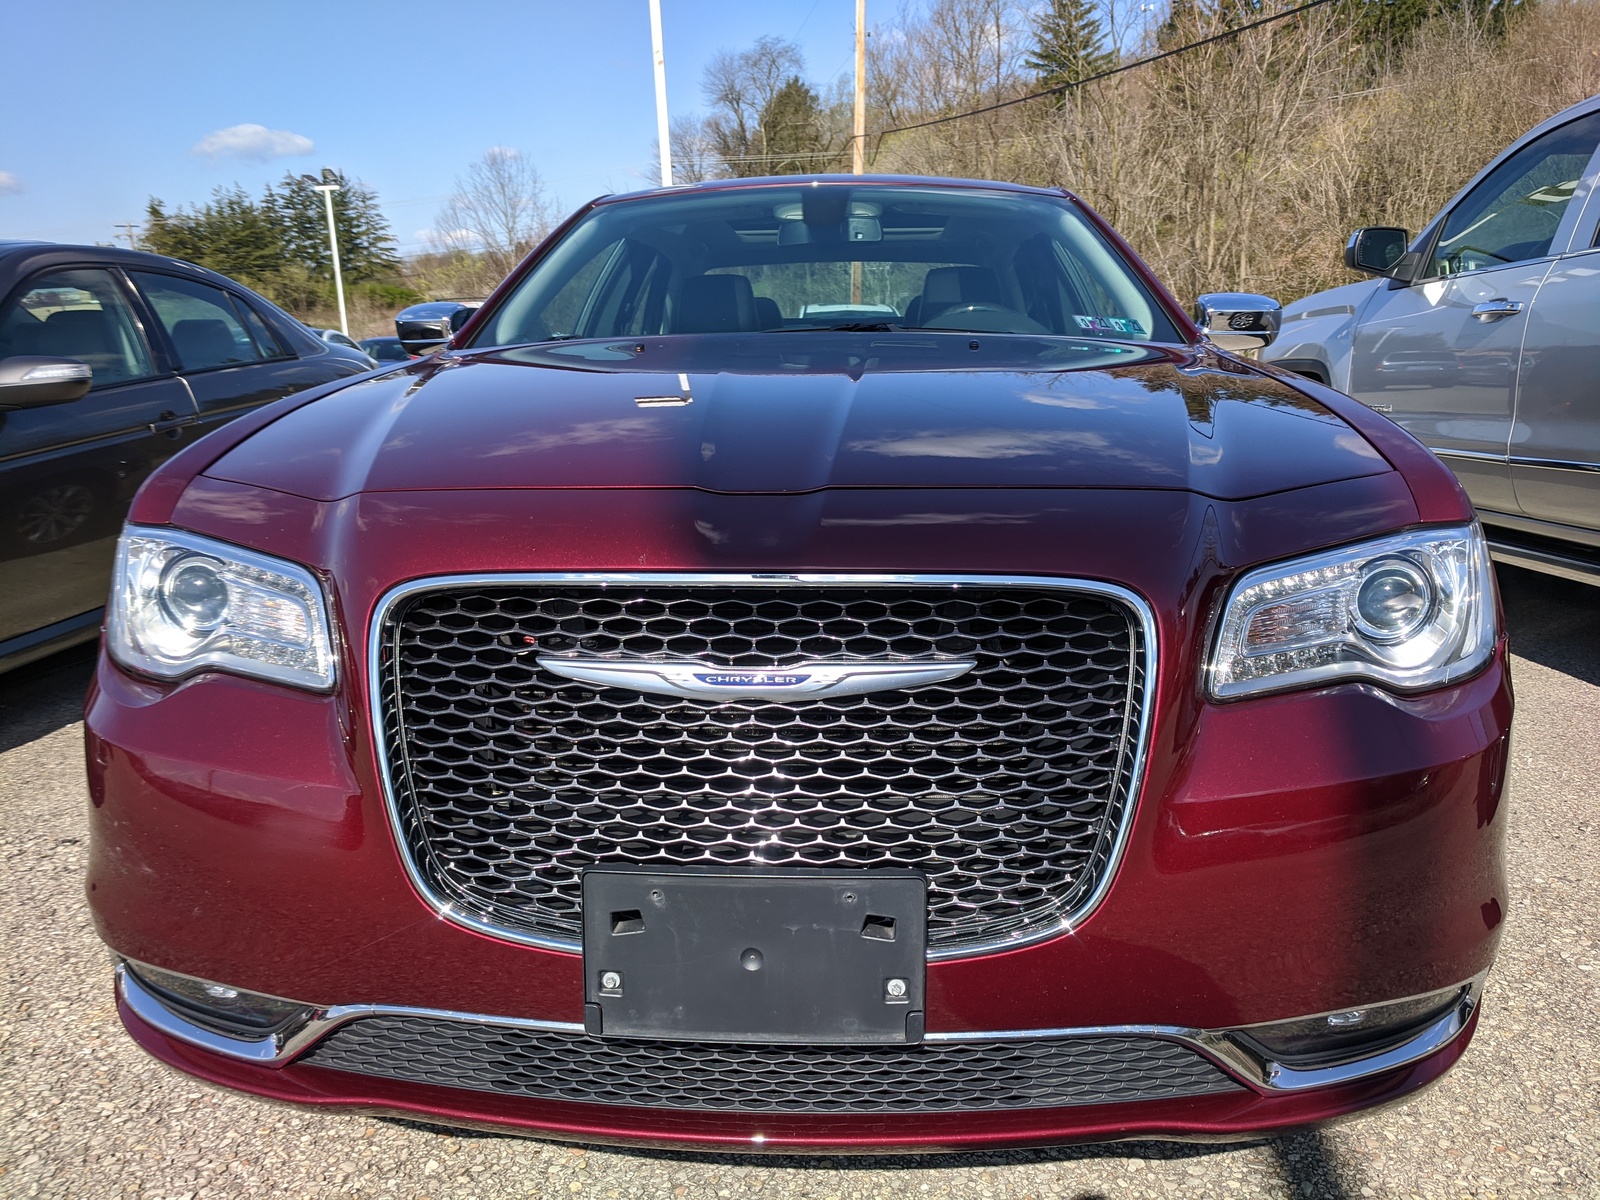 PreOwned 2019 Chrysler 300 Limited 4dr Car in Greensburg